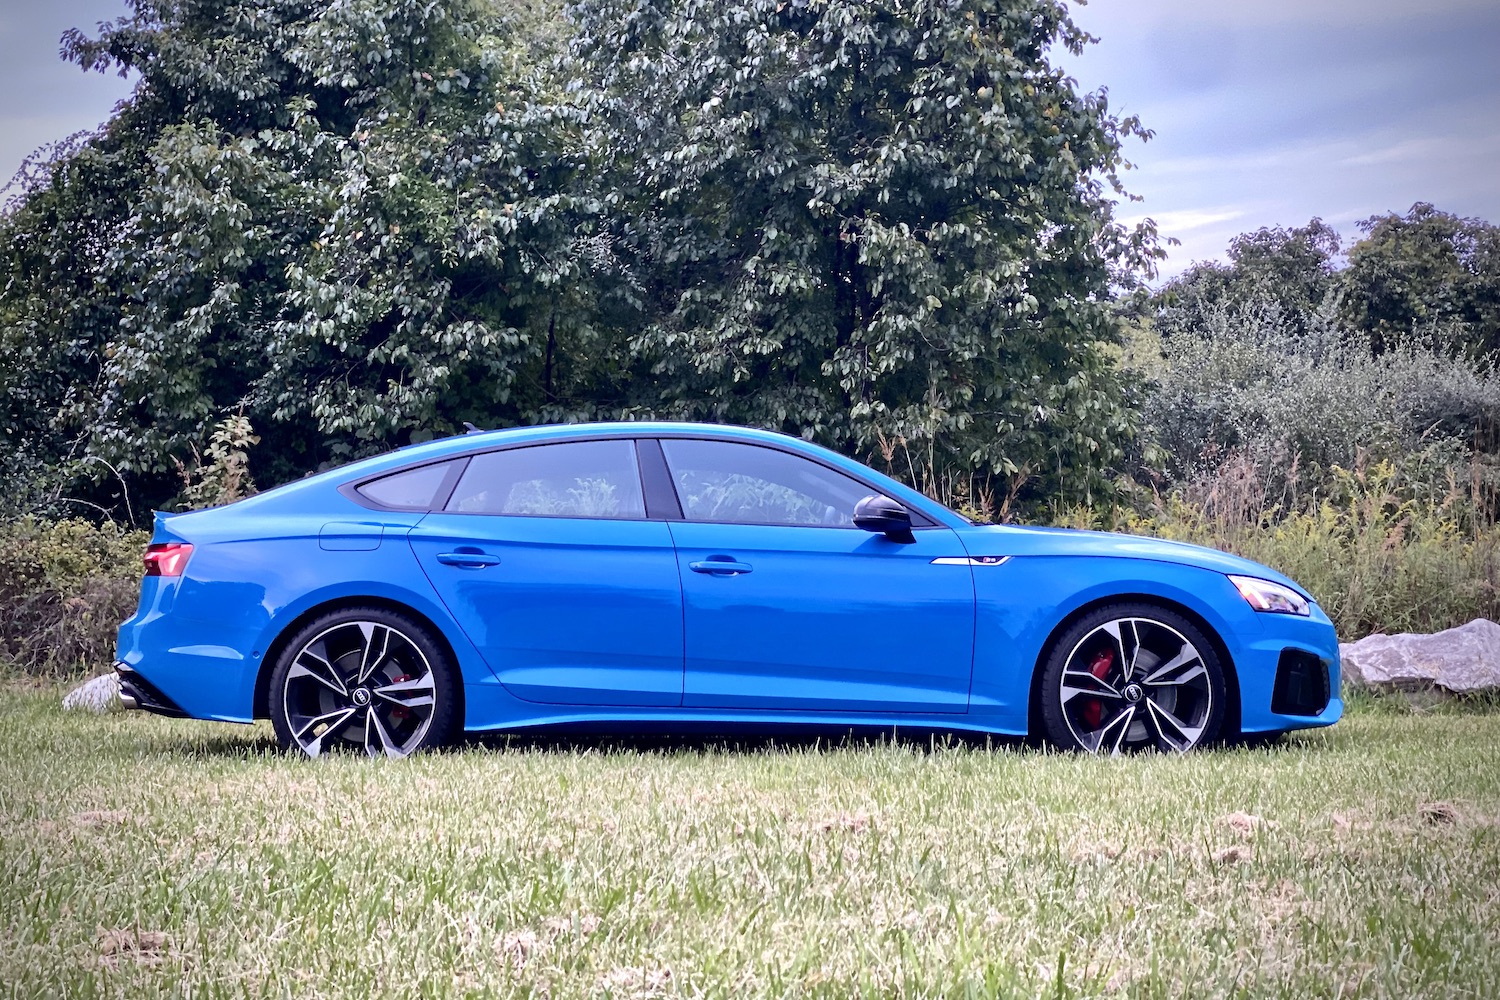 Side profile of 2023 Audi S5 Sportback in a grassy field with trees in the back.